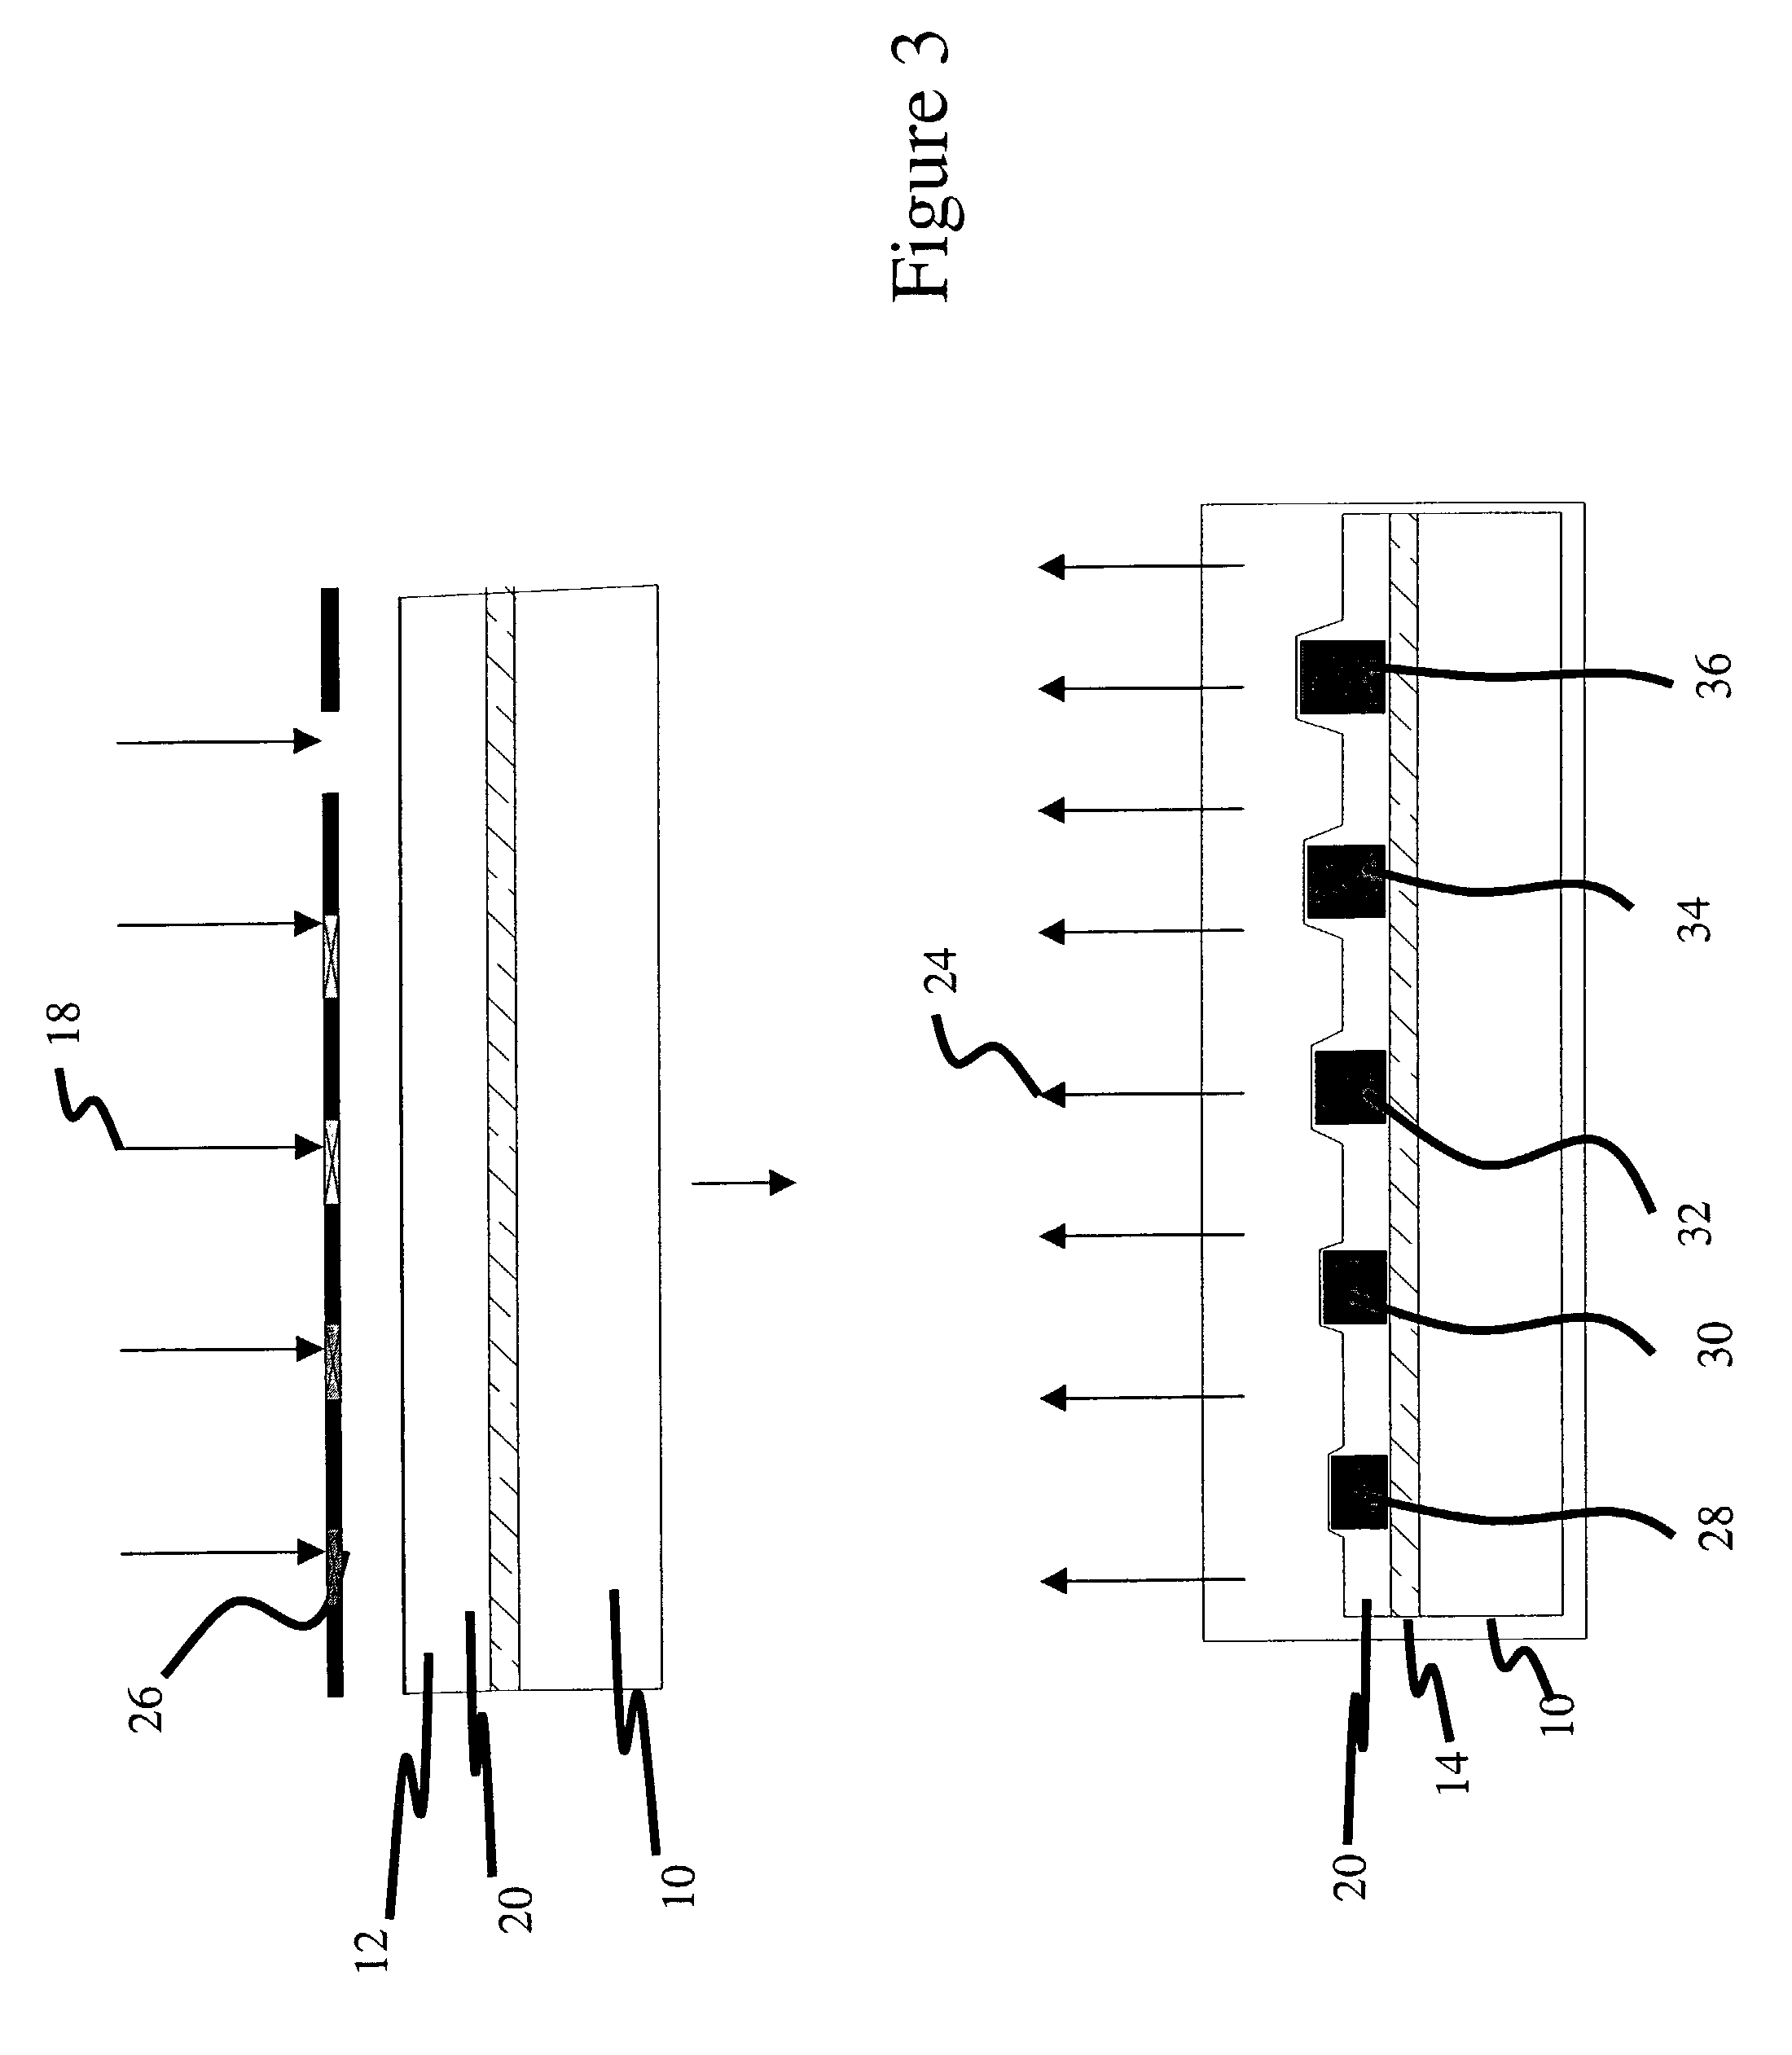 Optical device structures based on photo-definable polymerizable composites